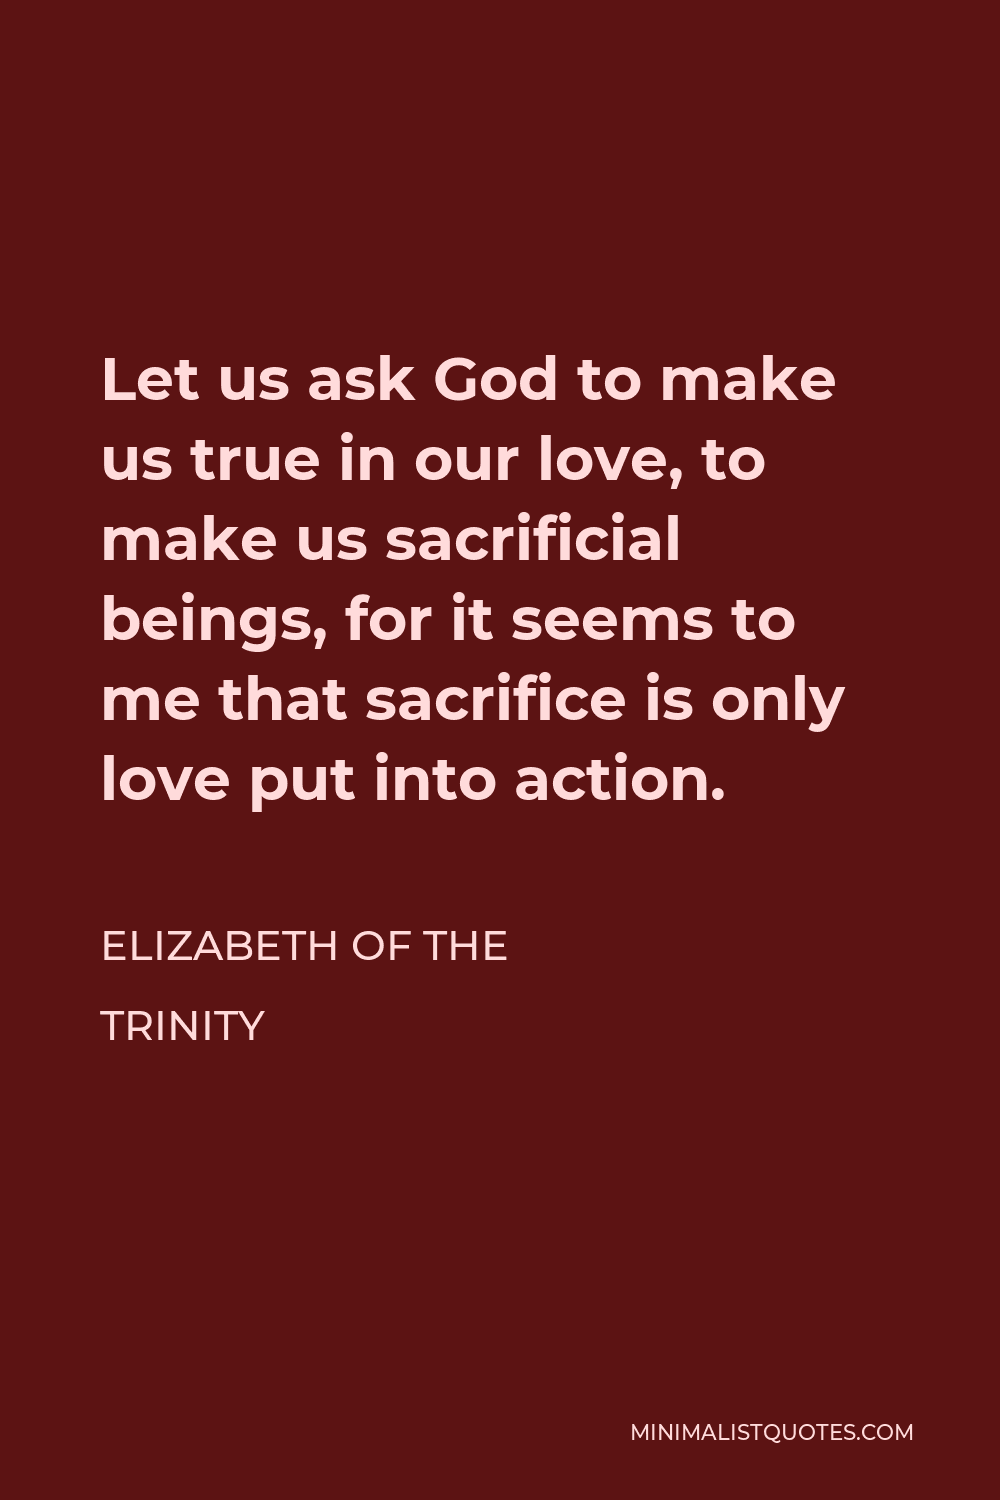 Elizabeth of the Trinity Quote - Let us ask God to make us true in our love, to make us sacrificial beings, for it seems to me that sacrifice is only love put into action.